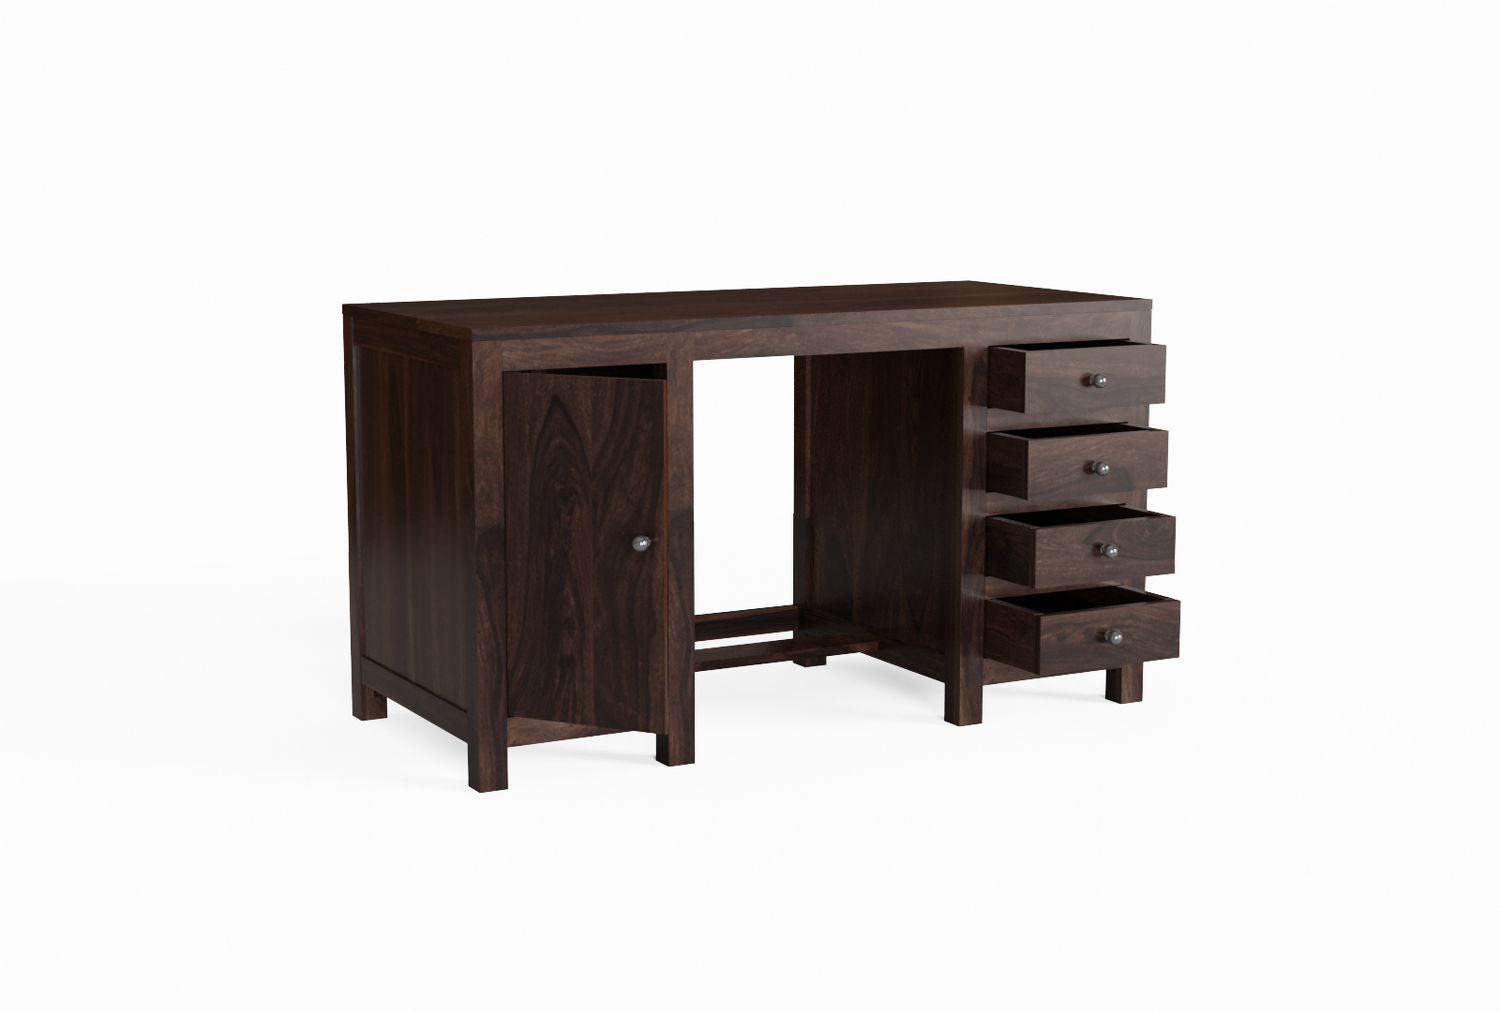 Woodwing Solid Sheesham Wood Study Table With 4 Drawers (Walnut Finish)